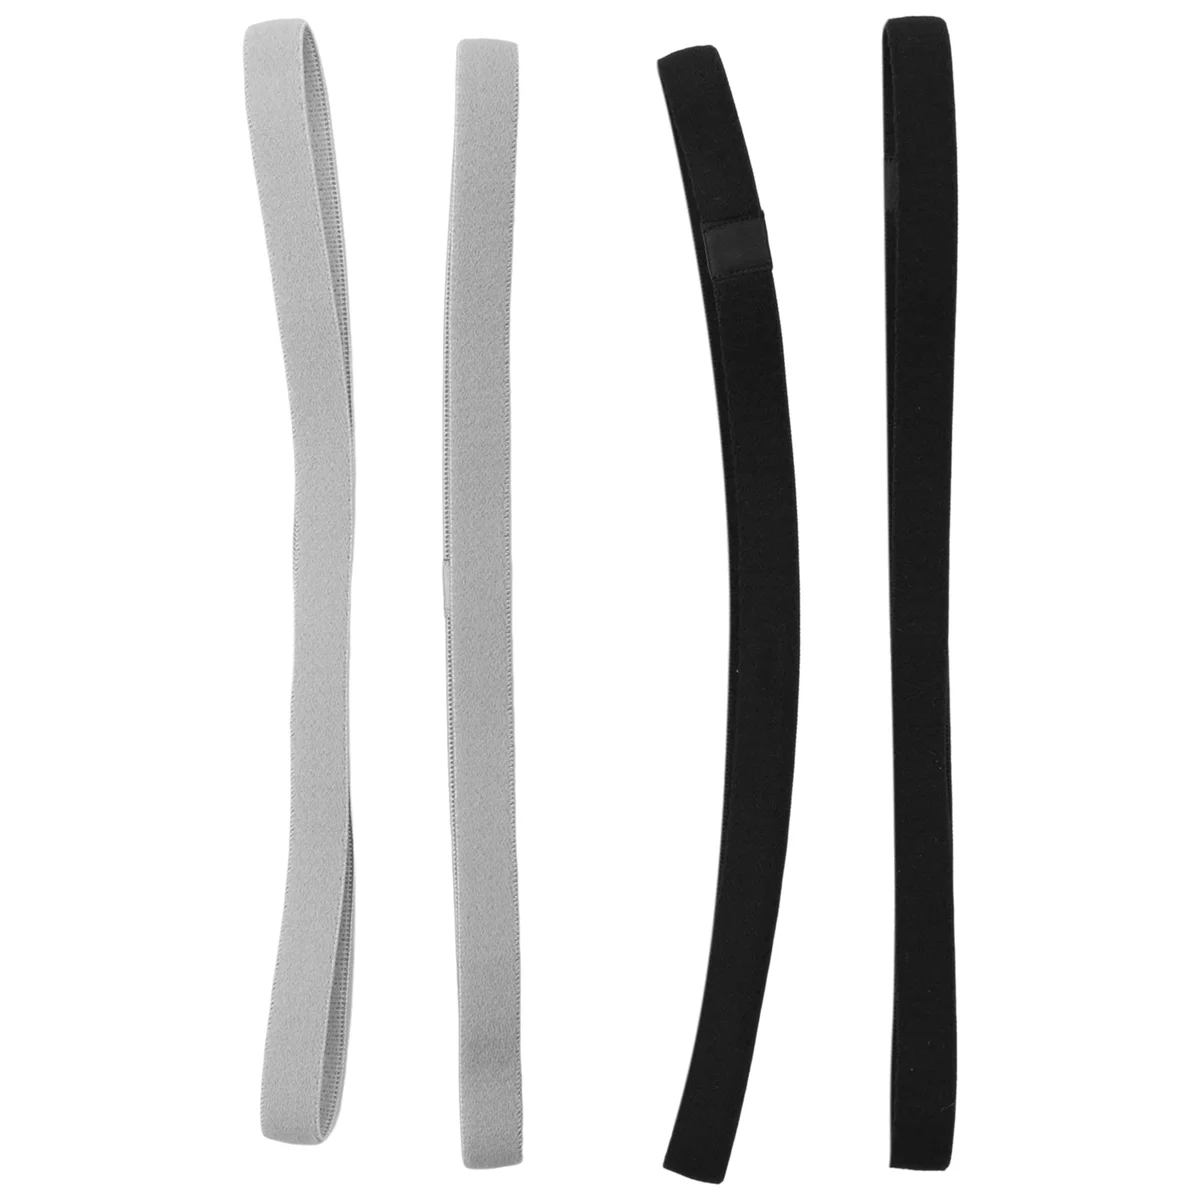 

4 Pcs Thick Non-Slip Elastic Sport Headbands Hair Headbands,Exercise Hair and Sweatbands for Women and Men(Black, Grey)